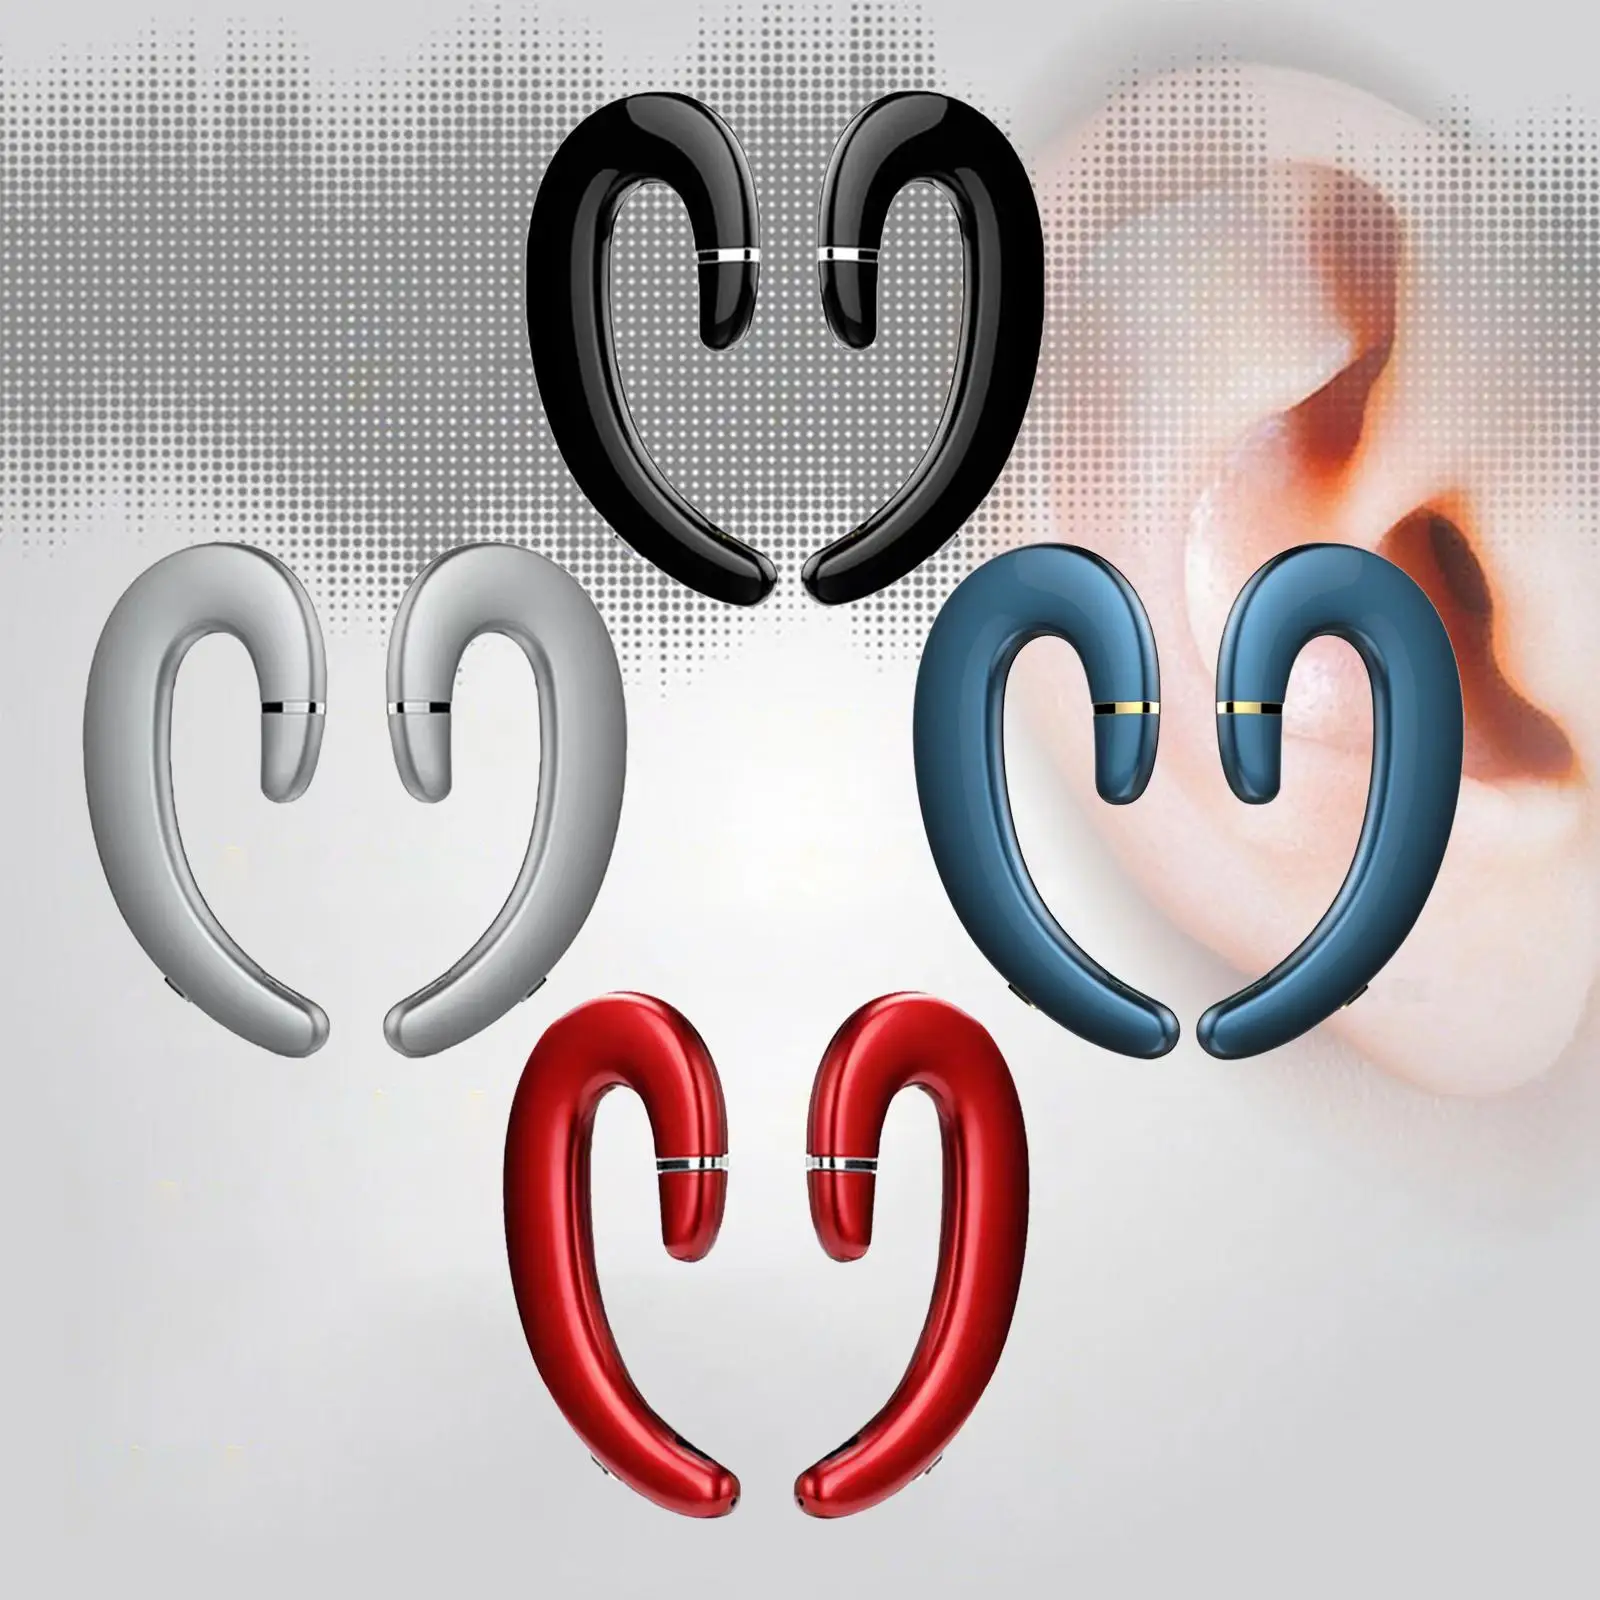 Bluetooth 5.0 Headphone Ear Hook Built in Microphone Stereo Handsfree HD Calling Painless wearing Earhooks for Driving Sports